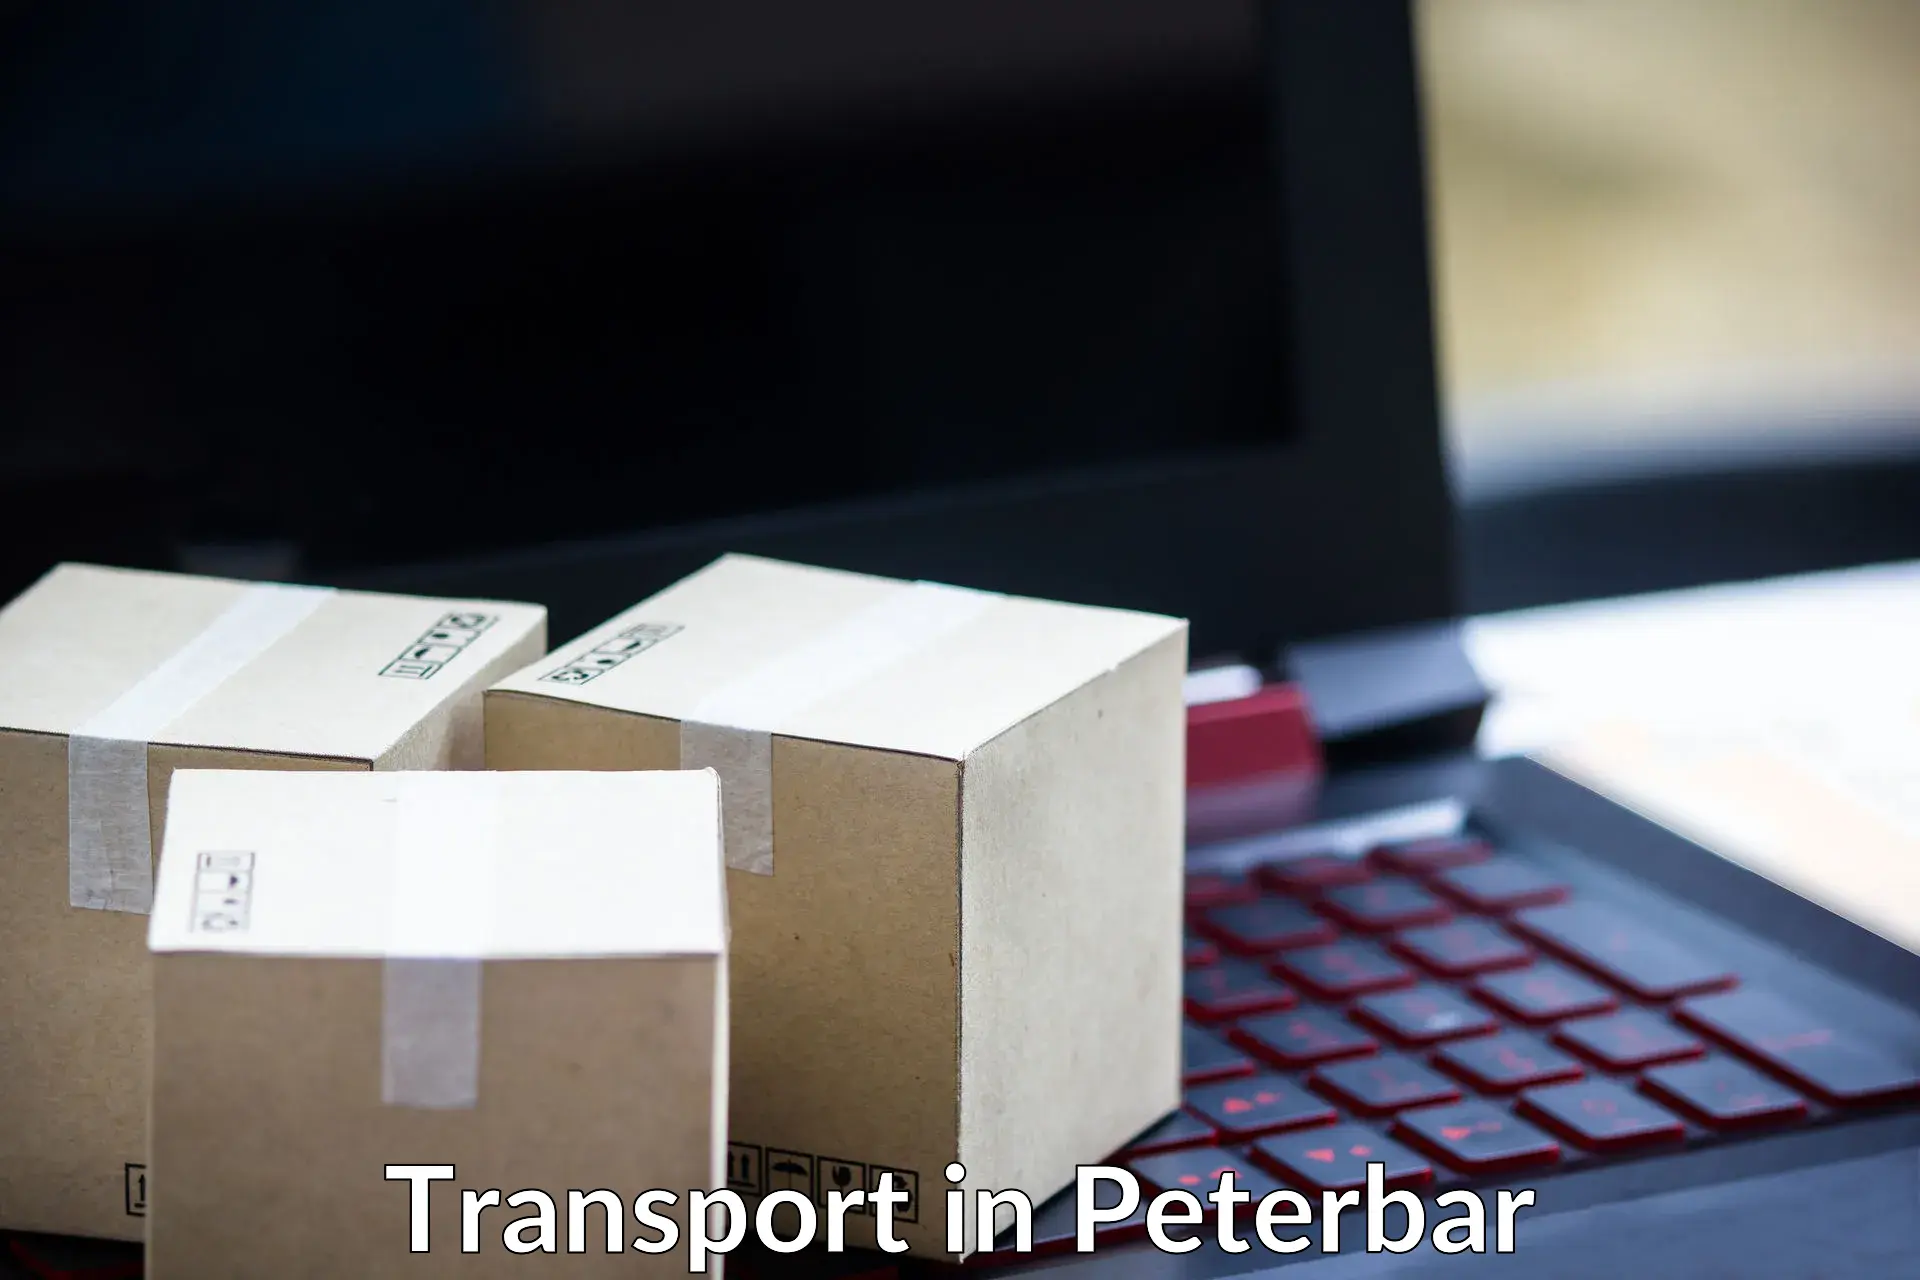 Land transport services in Peterbar